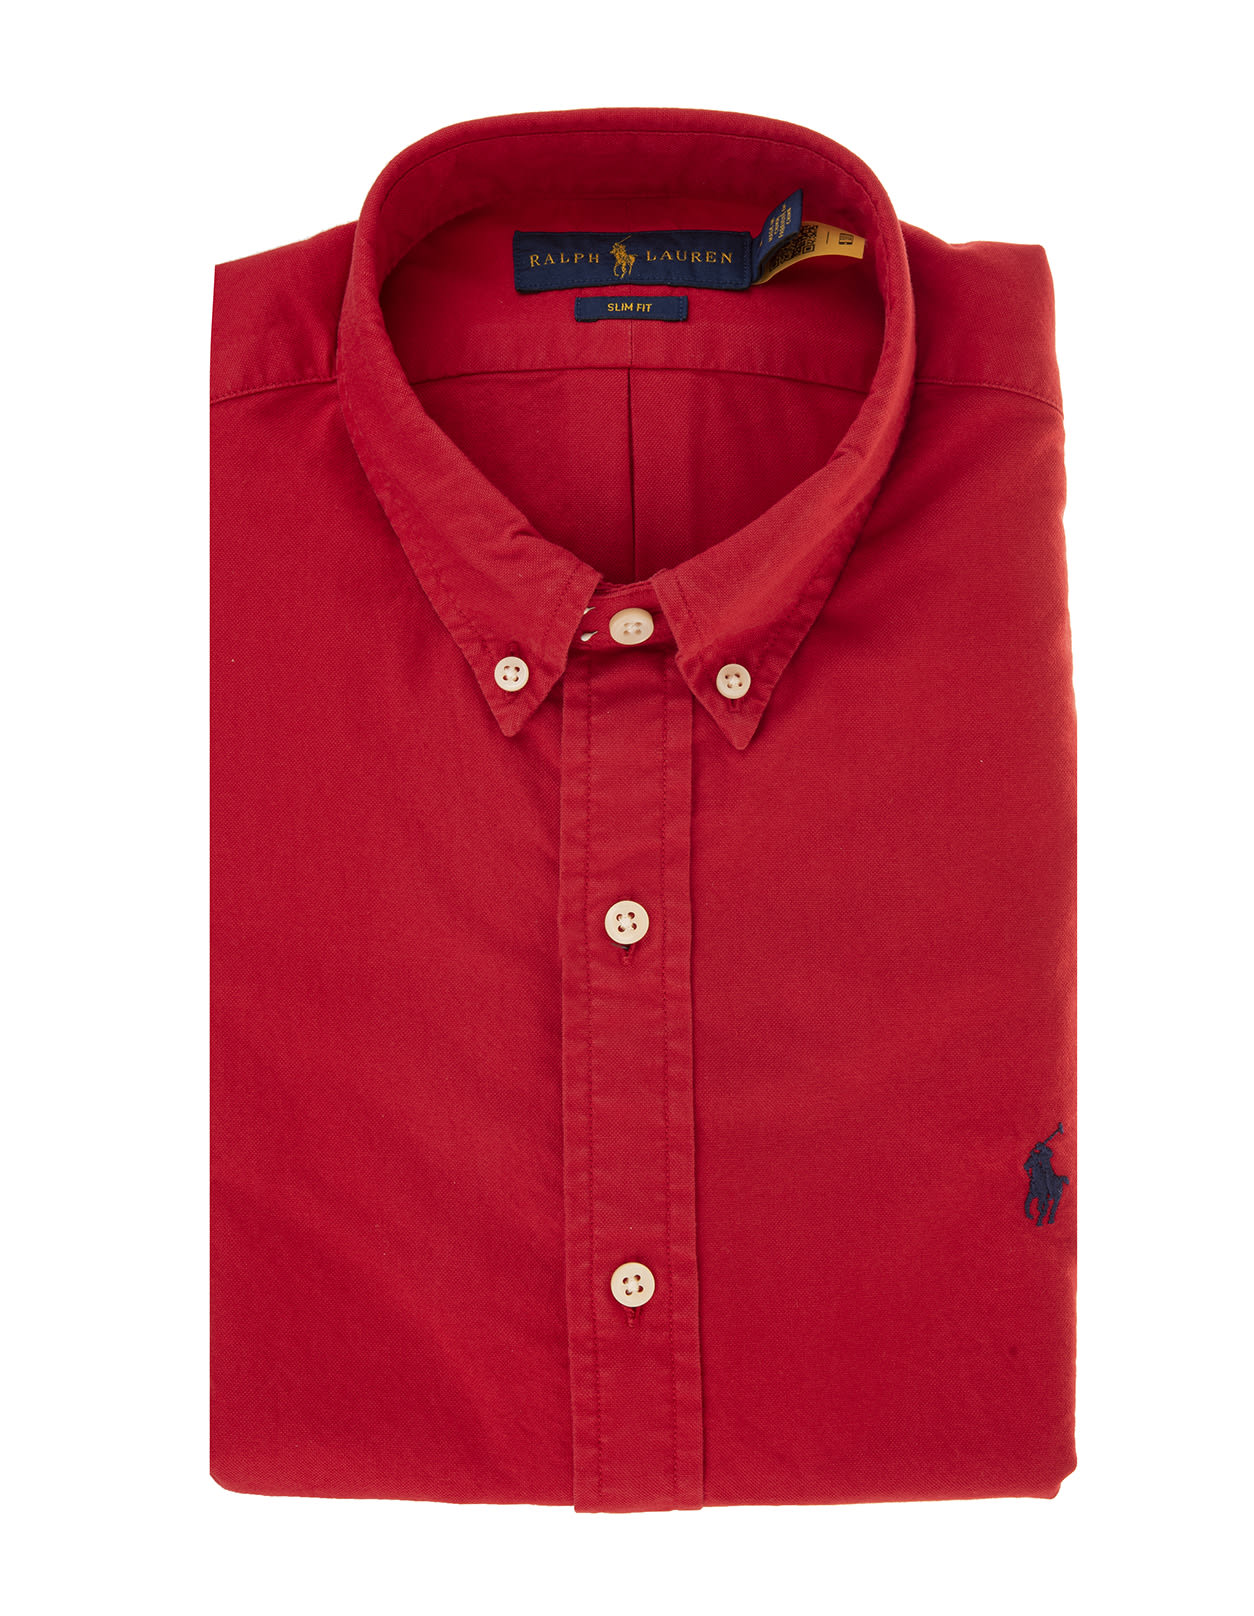 Ralph Lauren Man Slim Fit Red Shirt With Blue Pony